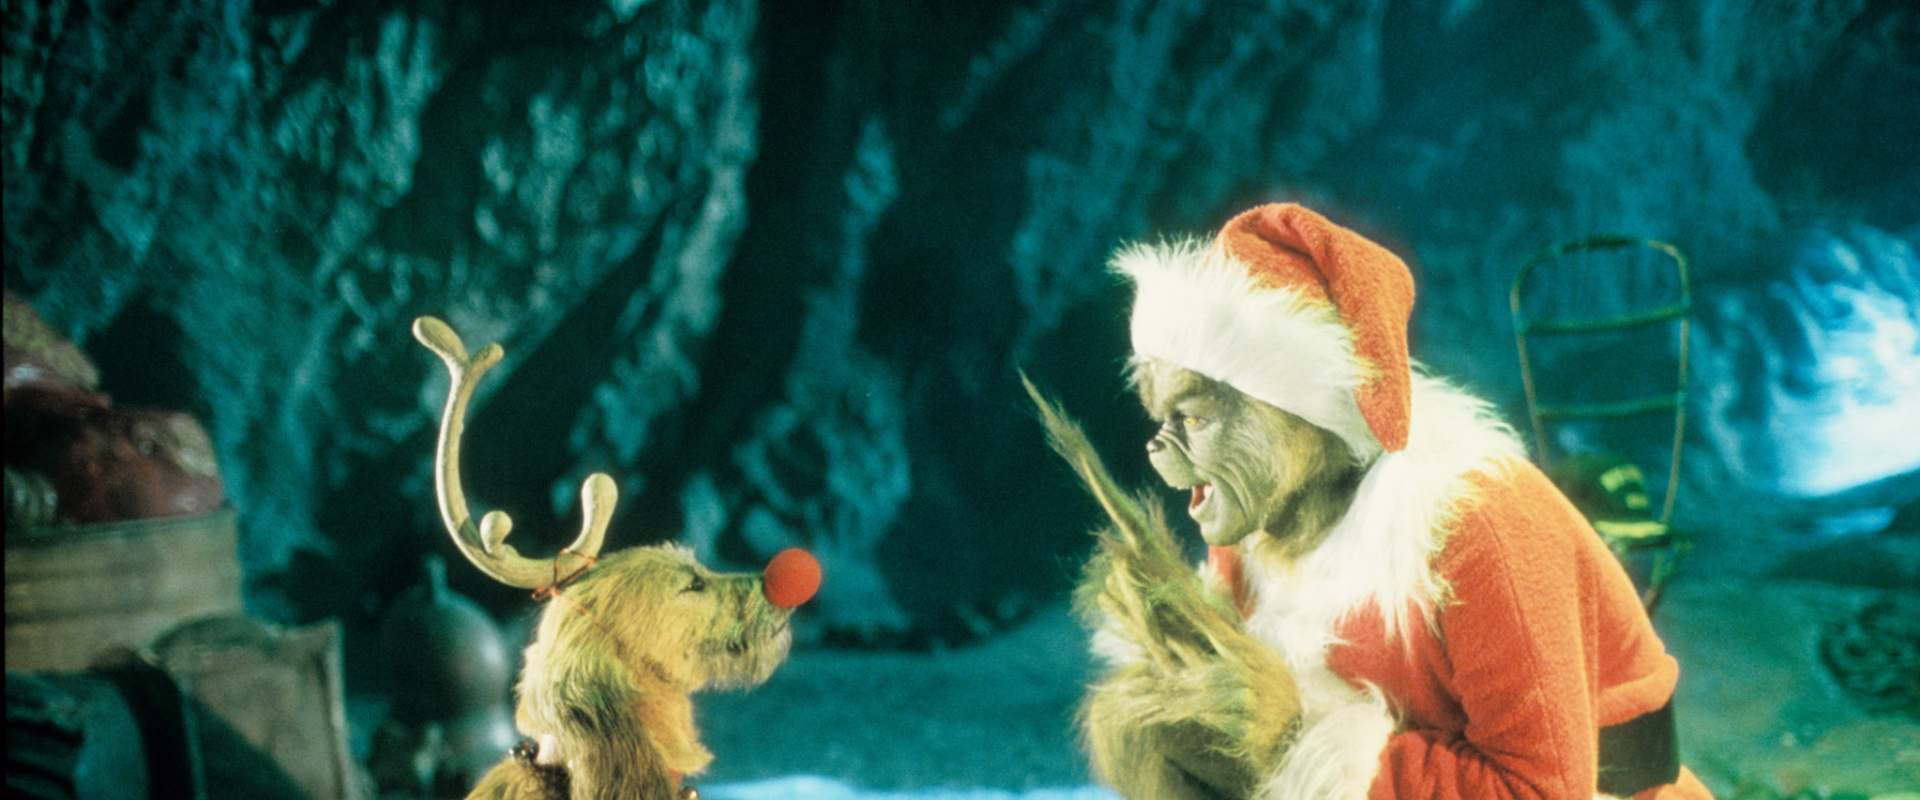 How the Grinch Stole Christmas background 2